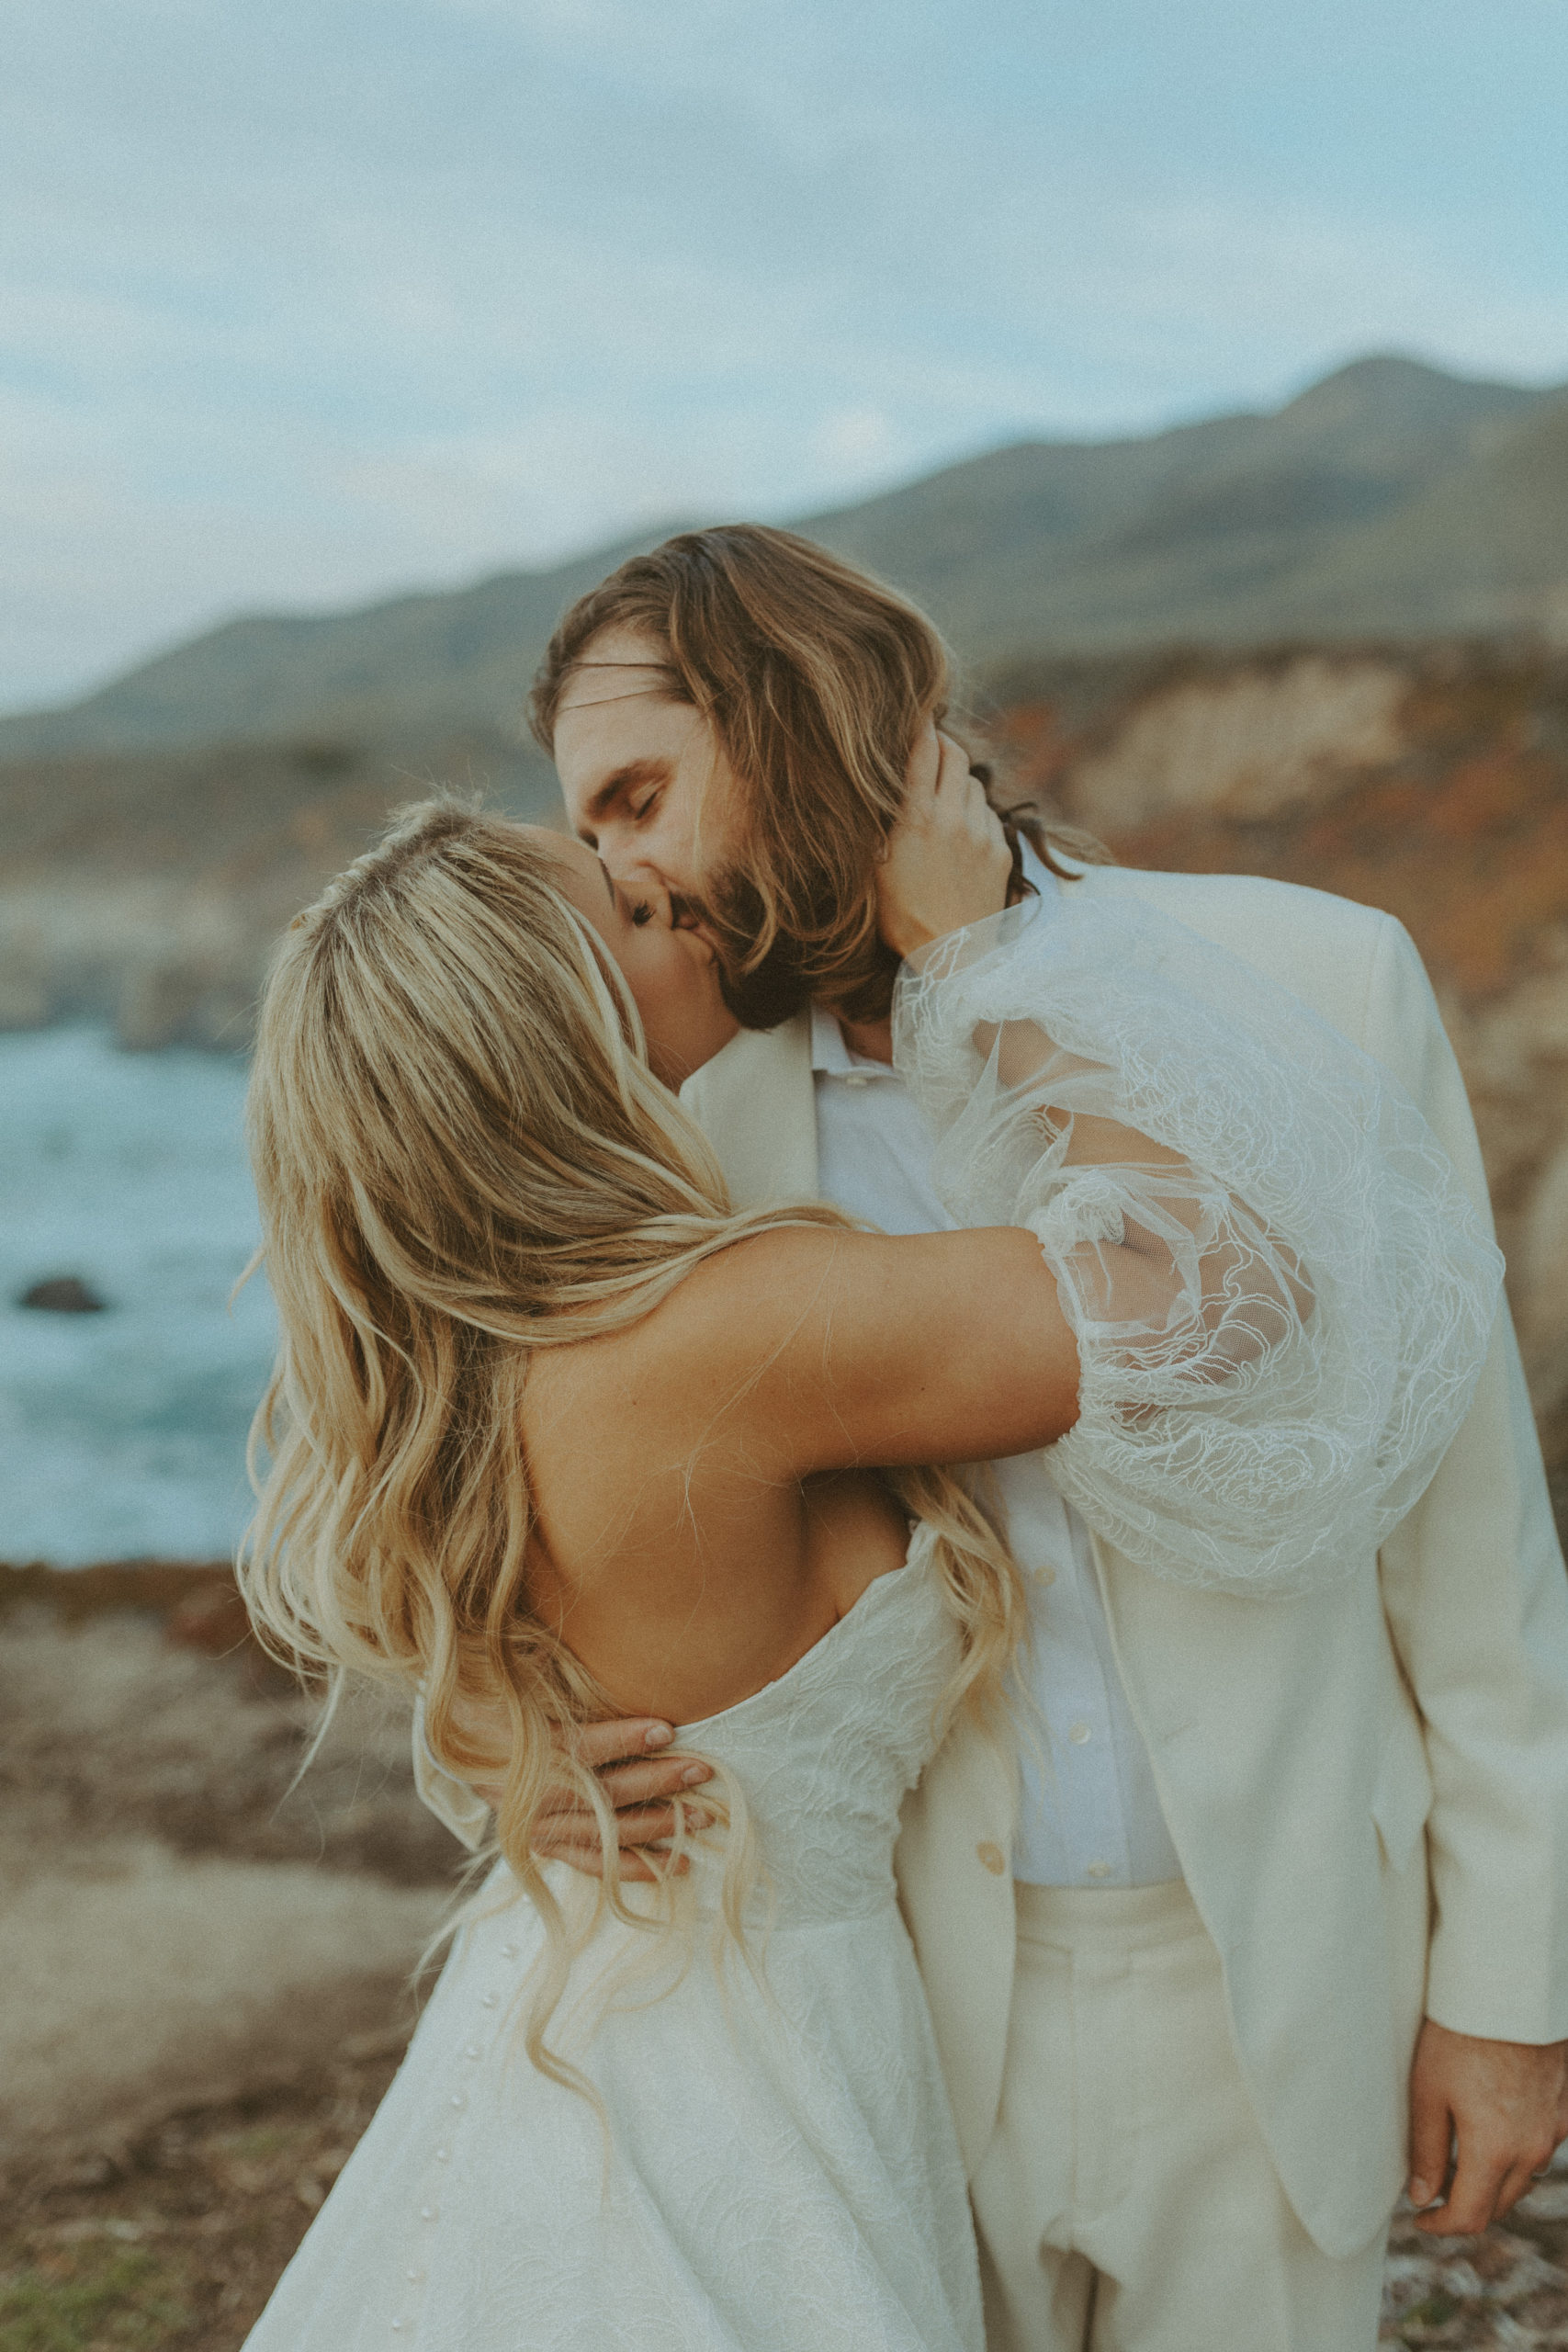 the couple kissing in the wind for unique wedding photos